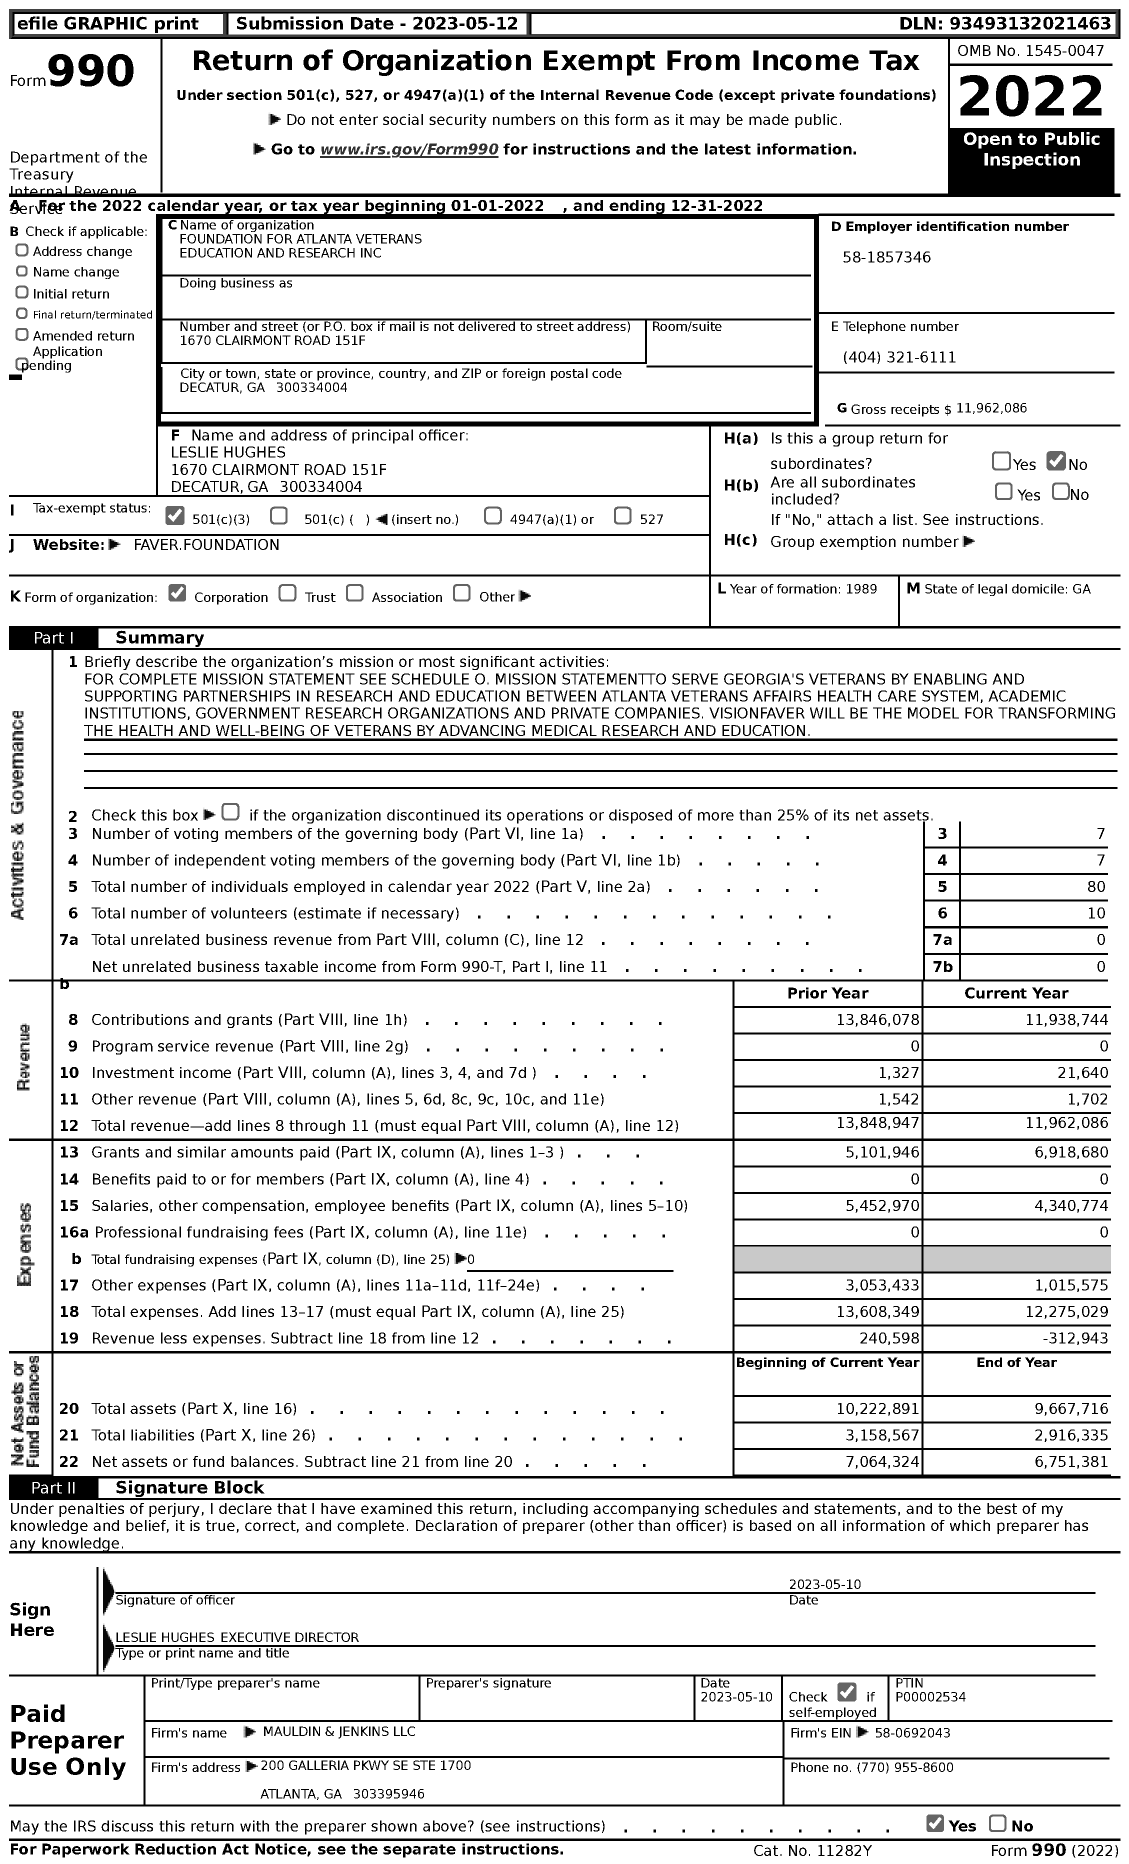 Image of first page of 2022 Form 990 for Foundation for Atlanta Veterans Education and Research (AREF)